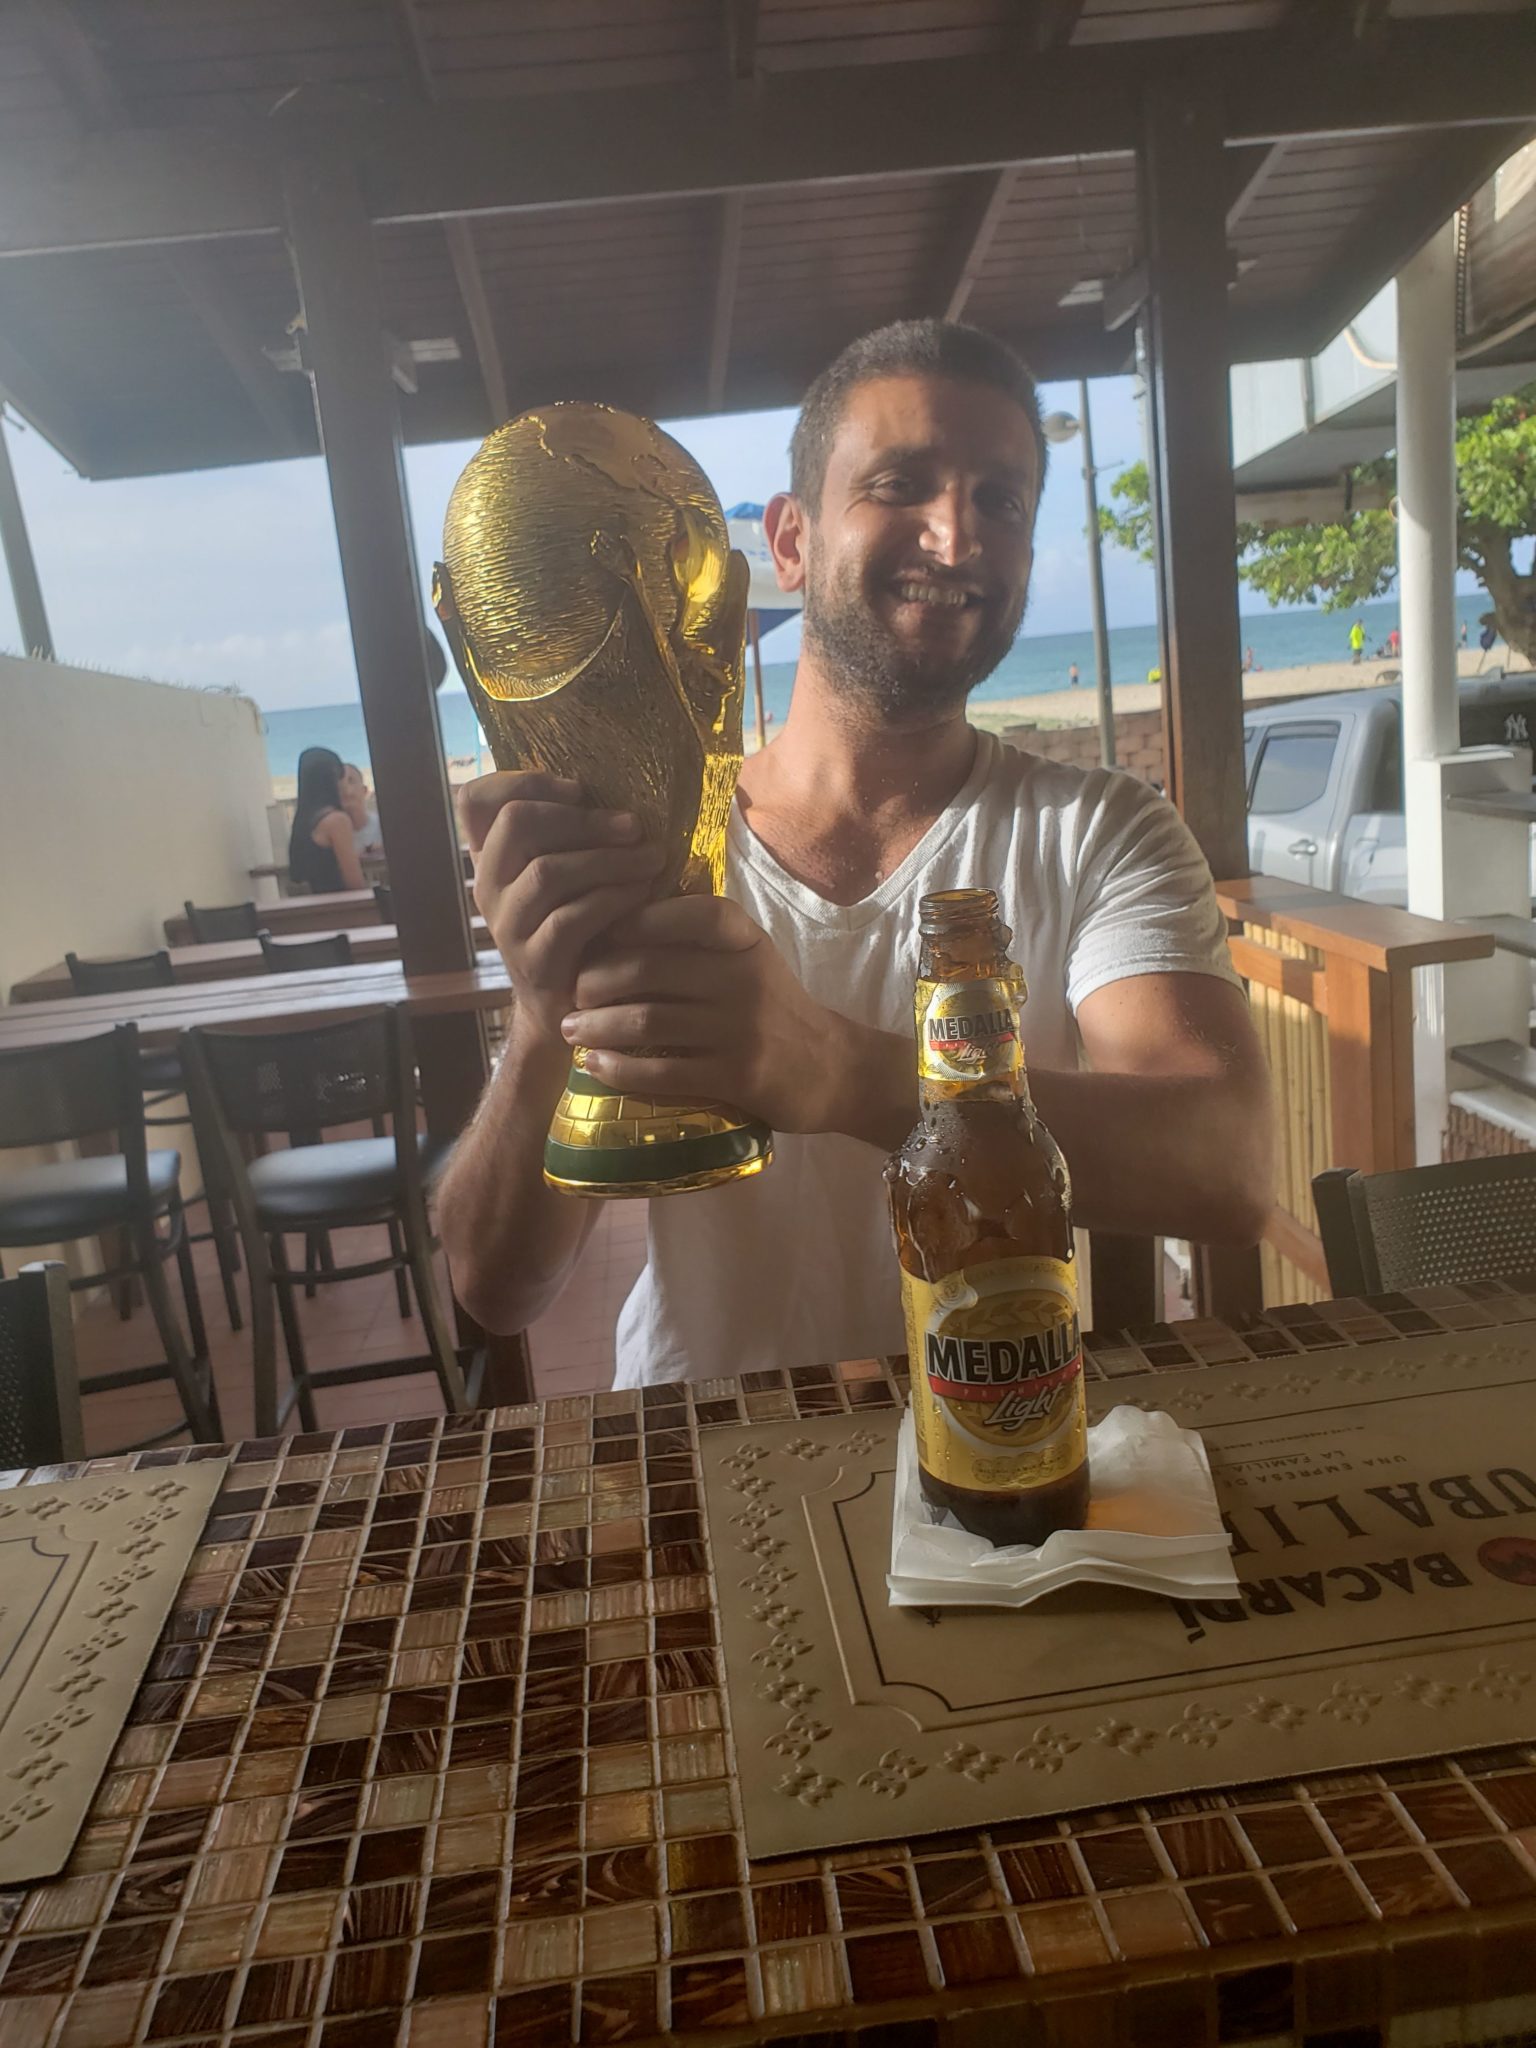 a man holding a trophy and a beer bottle